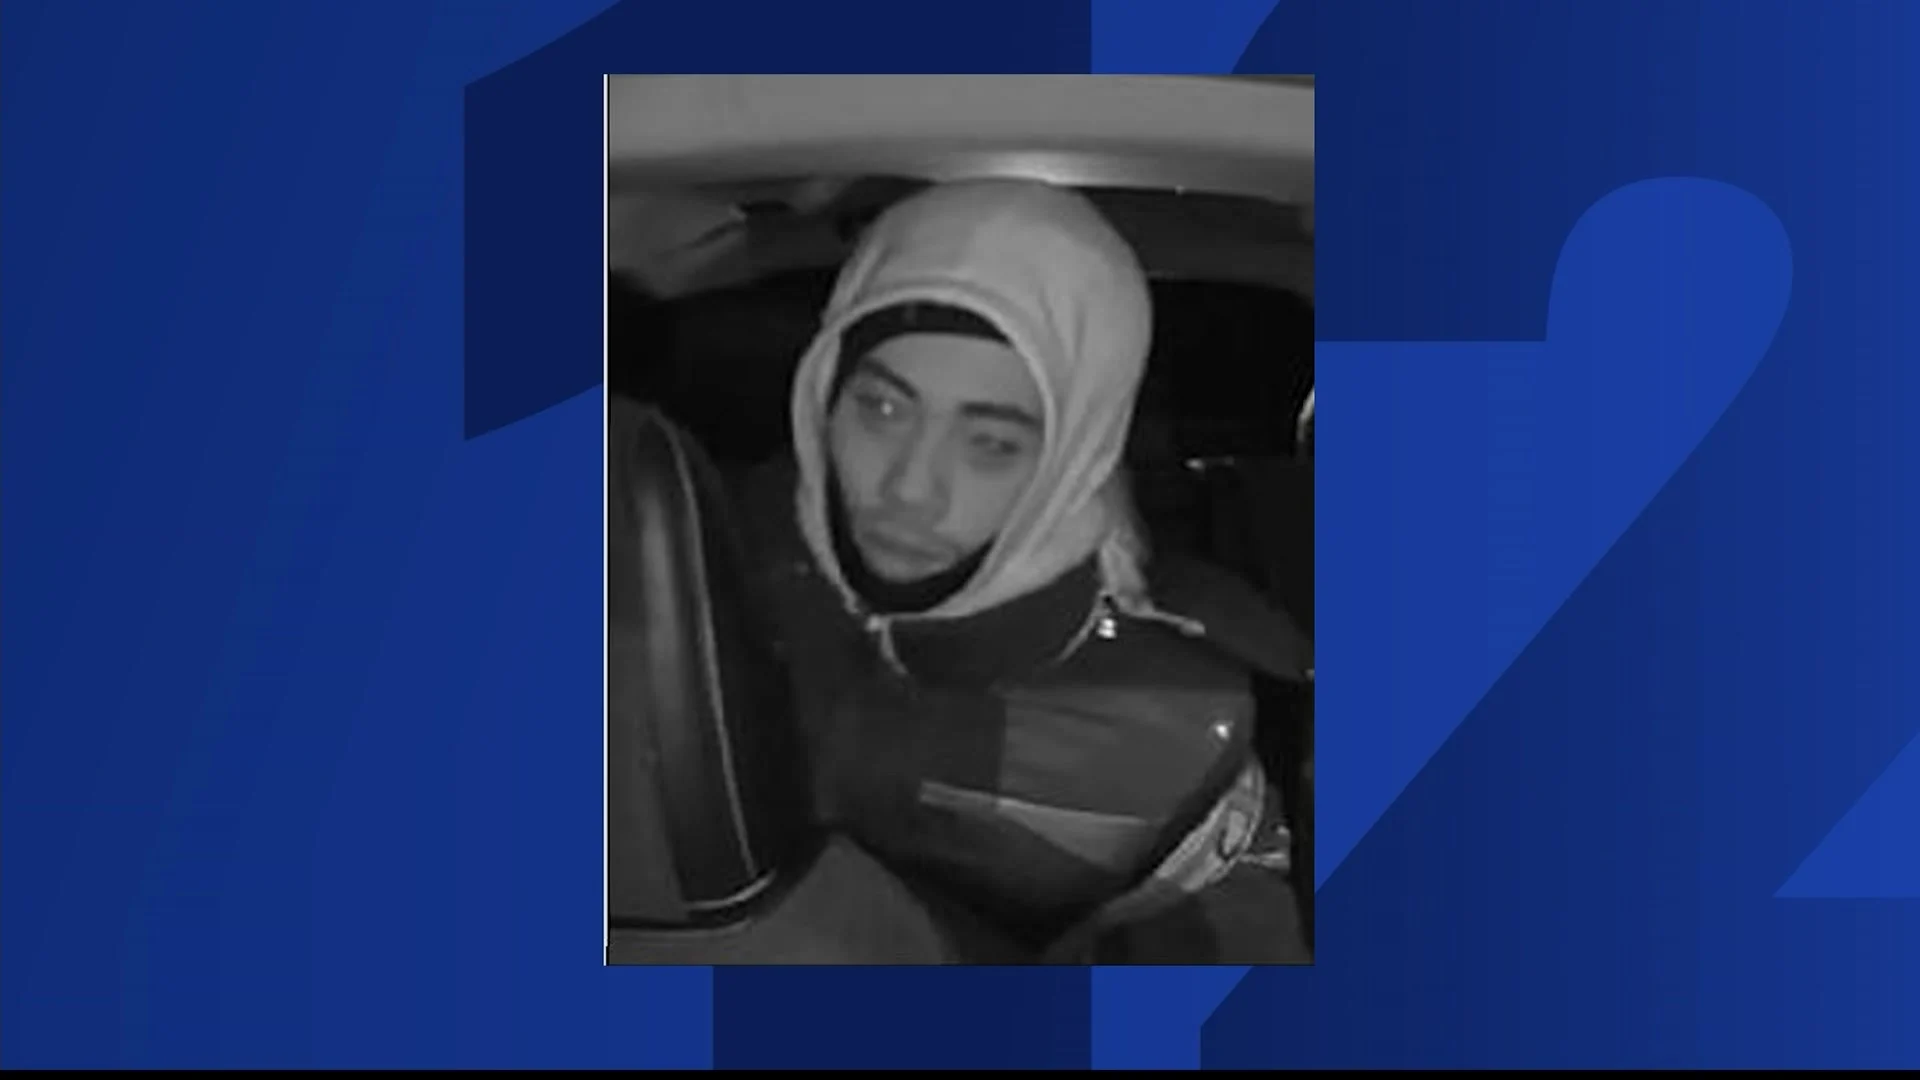 NYPD: Man pistol-whipped taxi driver in Olinville, fired shots at vehicle; suspect sought